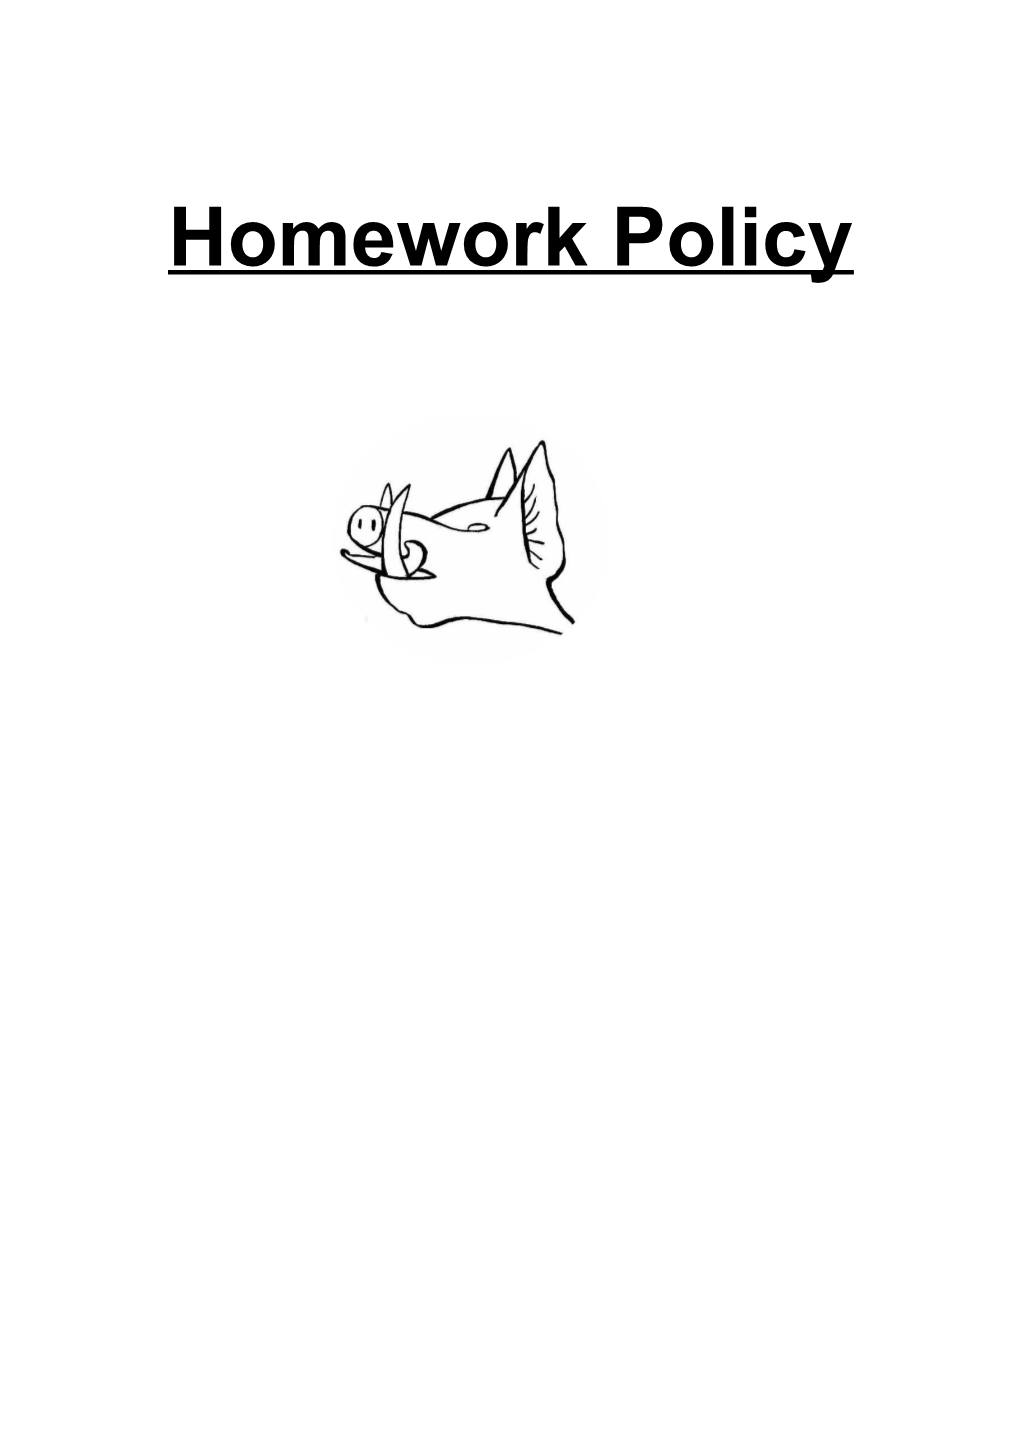 The Aims of Our Homeworkpolicy Are